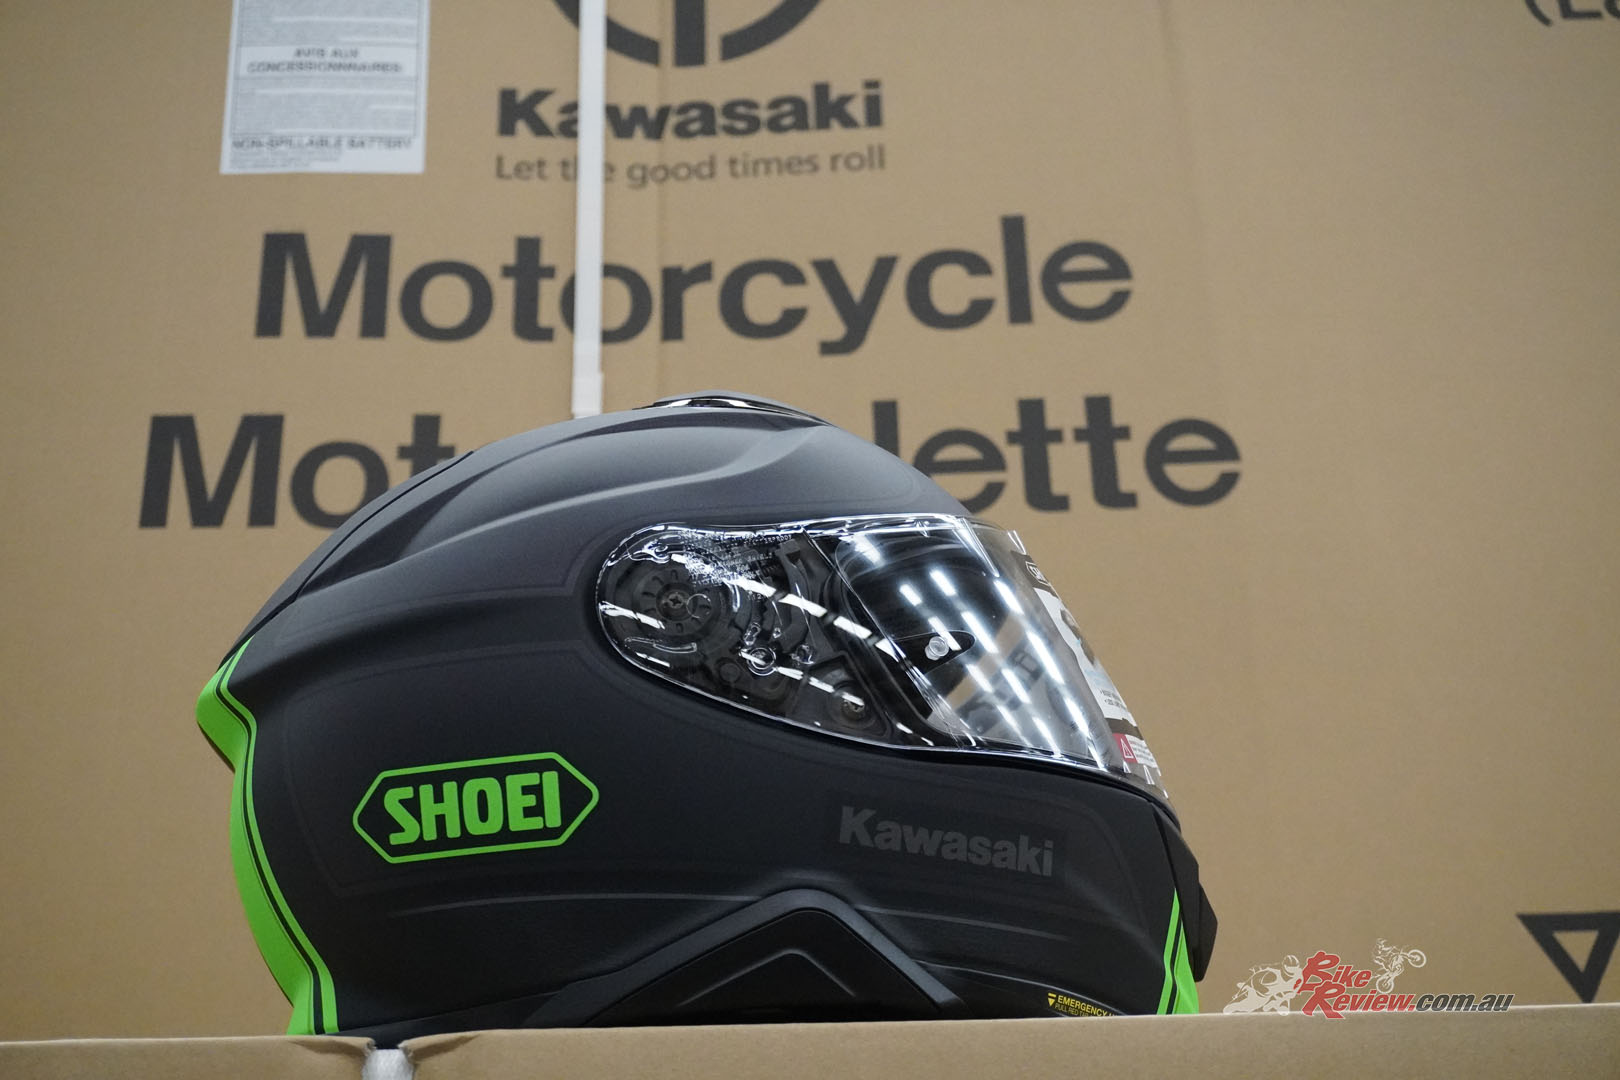 Shoei have recently Collaborated with Kawasaki to bring fans of the green machines a lid to match!